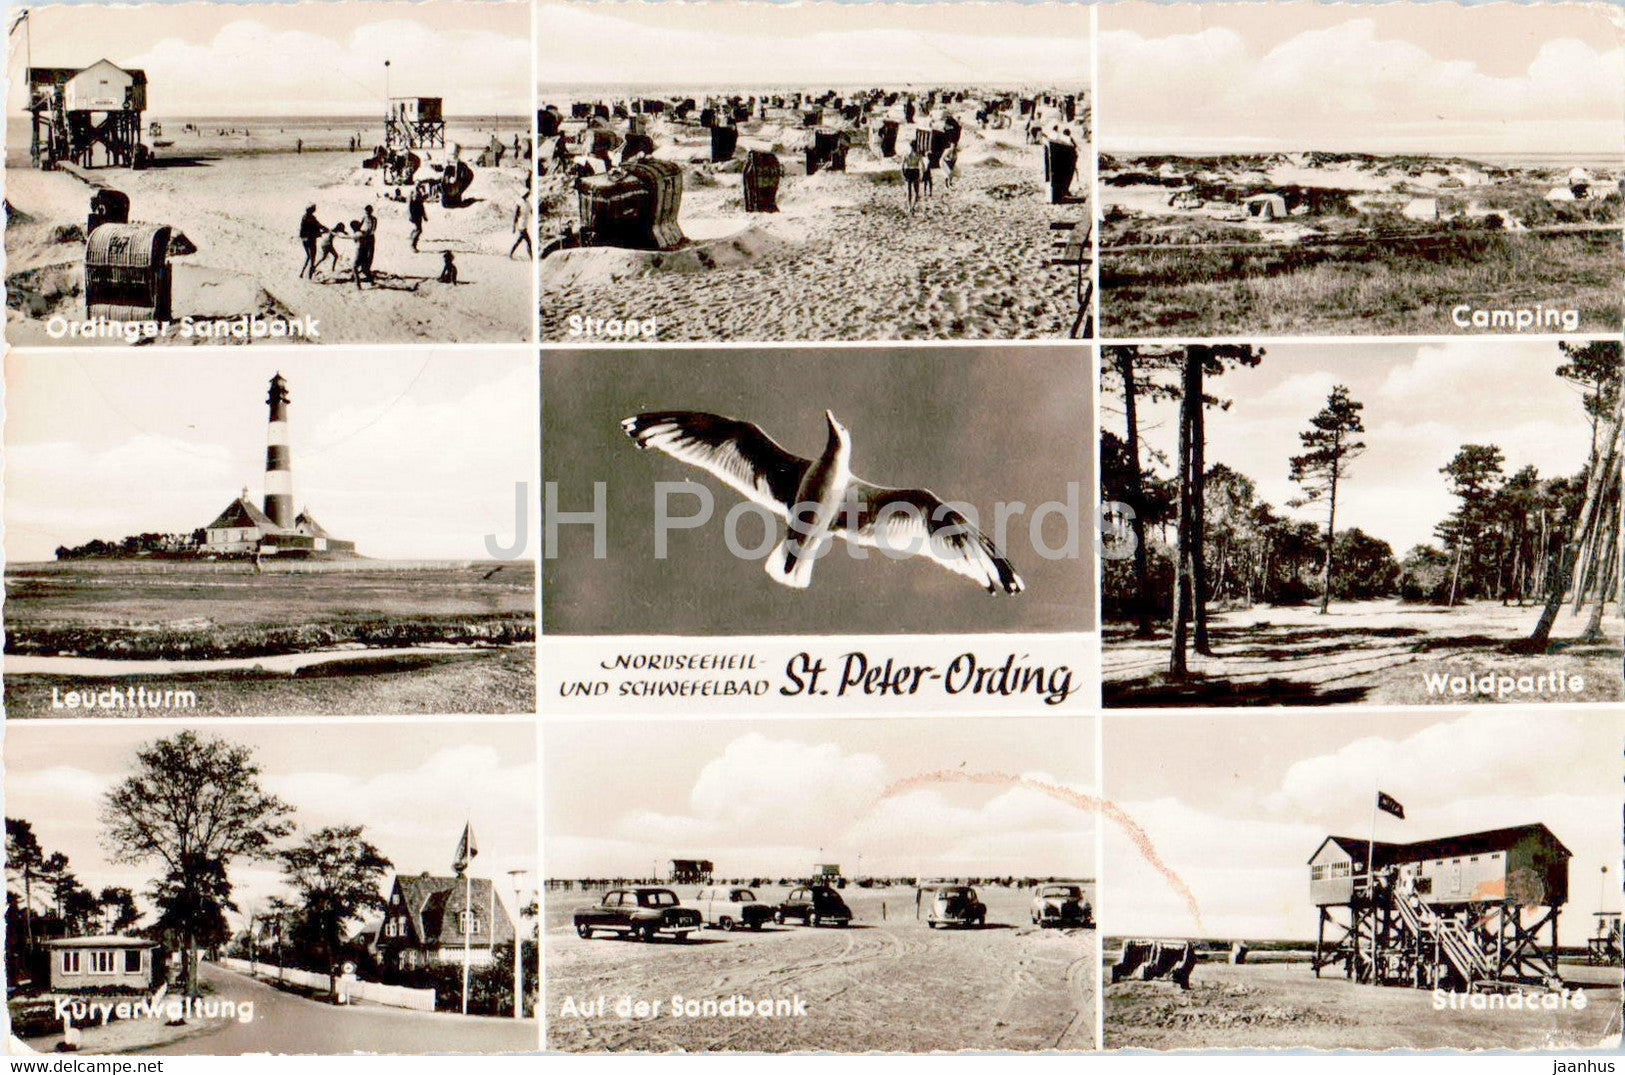 Nordseeheilbad und Schwefelbad St Peter Ording - Strand - Camping - Leuchtturm - lighthouse - 1960 - Germany - used - JH Postcards